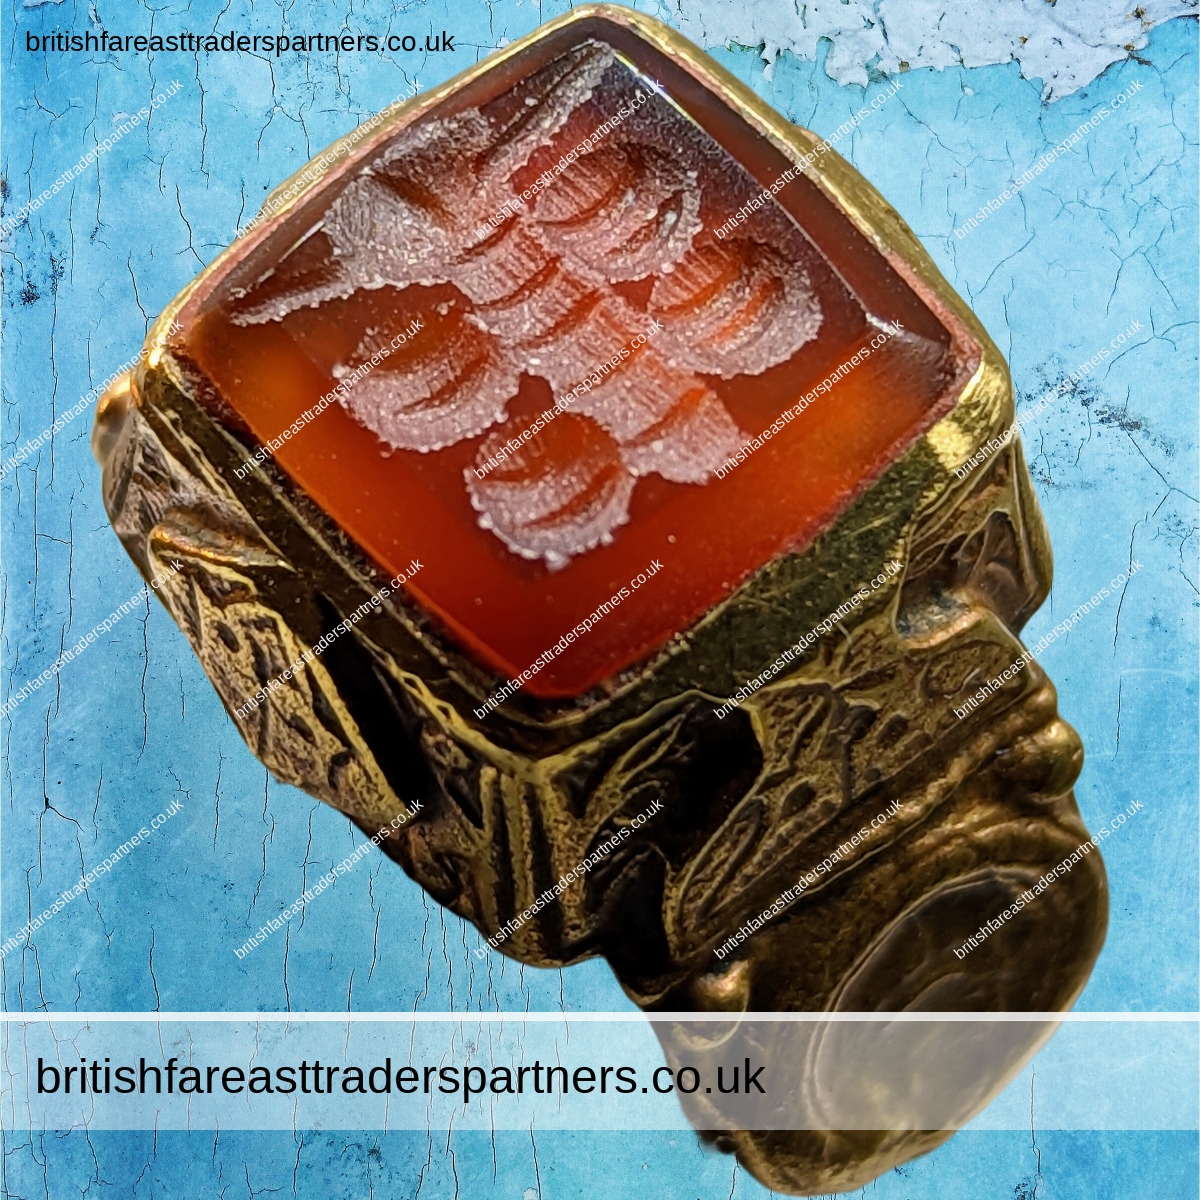 ANCIENT POST MEDIEVAL ISLAMIC OTTOMAN RING GOLDEN GILDED SIGNET SIGIL SEAL INSECT INTAGLIO CARVED ON REDDISH GEMSTONE ISLAMIC COLLECTABLES |  JEWELLERY | CULTURE | HERITAGE | HISTORY | FASHION | LIFESTYLE